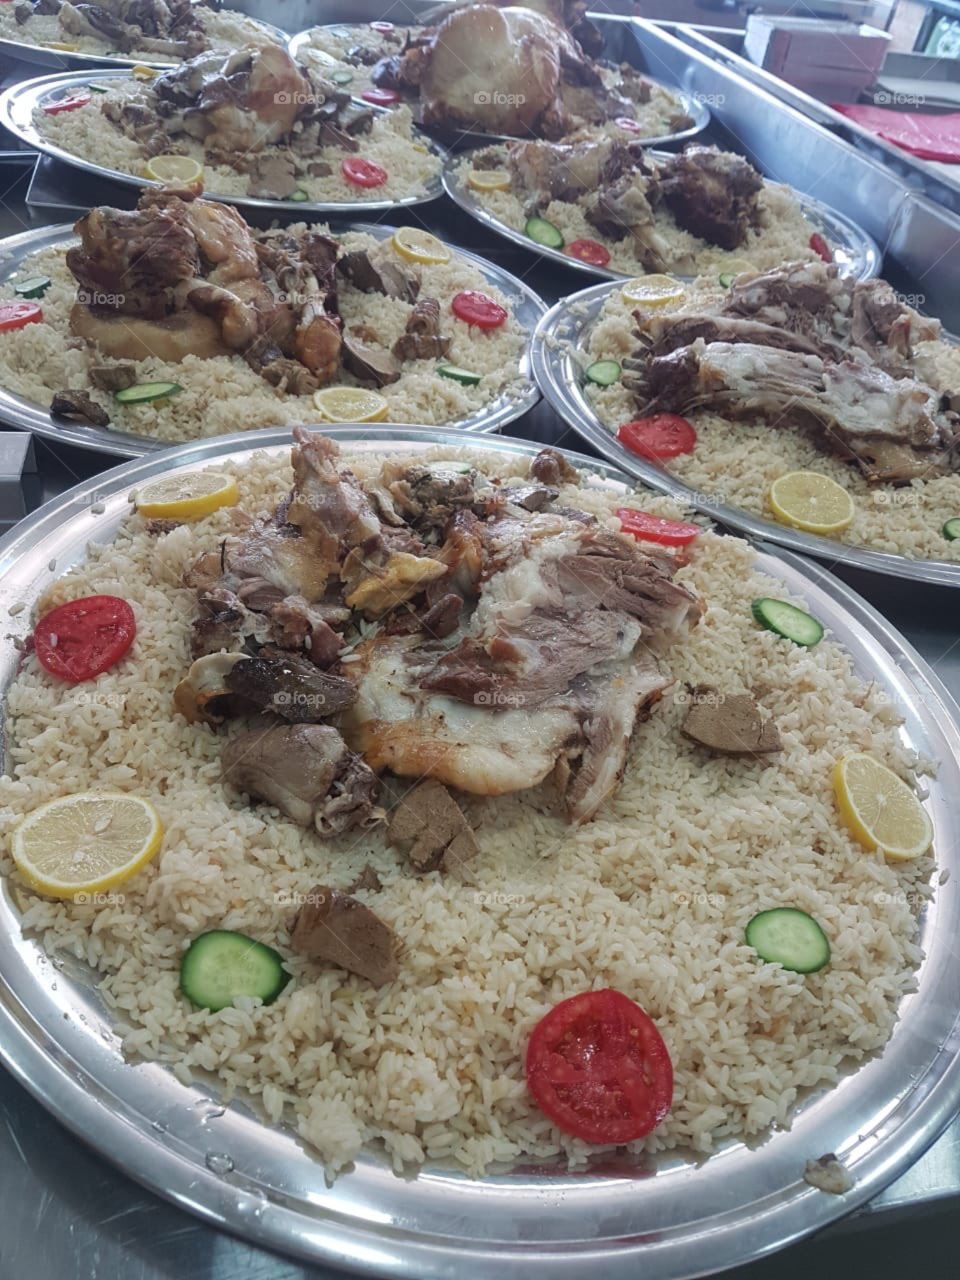 Laham Mandi or Lamb Mandi is a Saudi Arabian Traditional dish which is also very popular in other middle eastern countries like United Arab Emirates, Qatar, Kuwait, Oman and yemen. Rice made with special spices while lamb gets Roasted under the Soil.